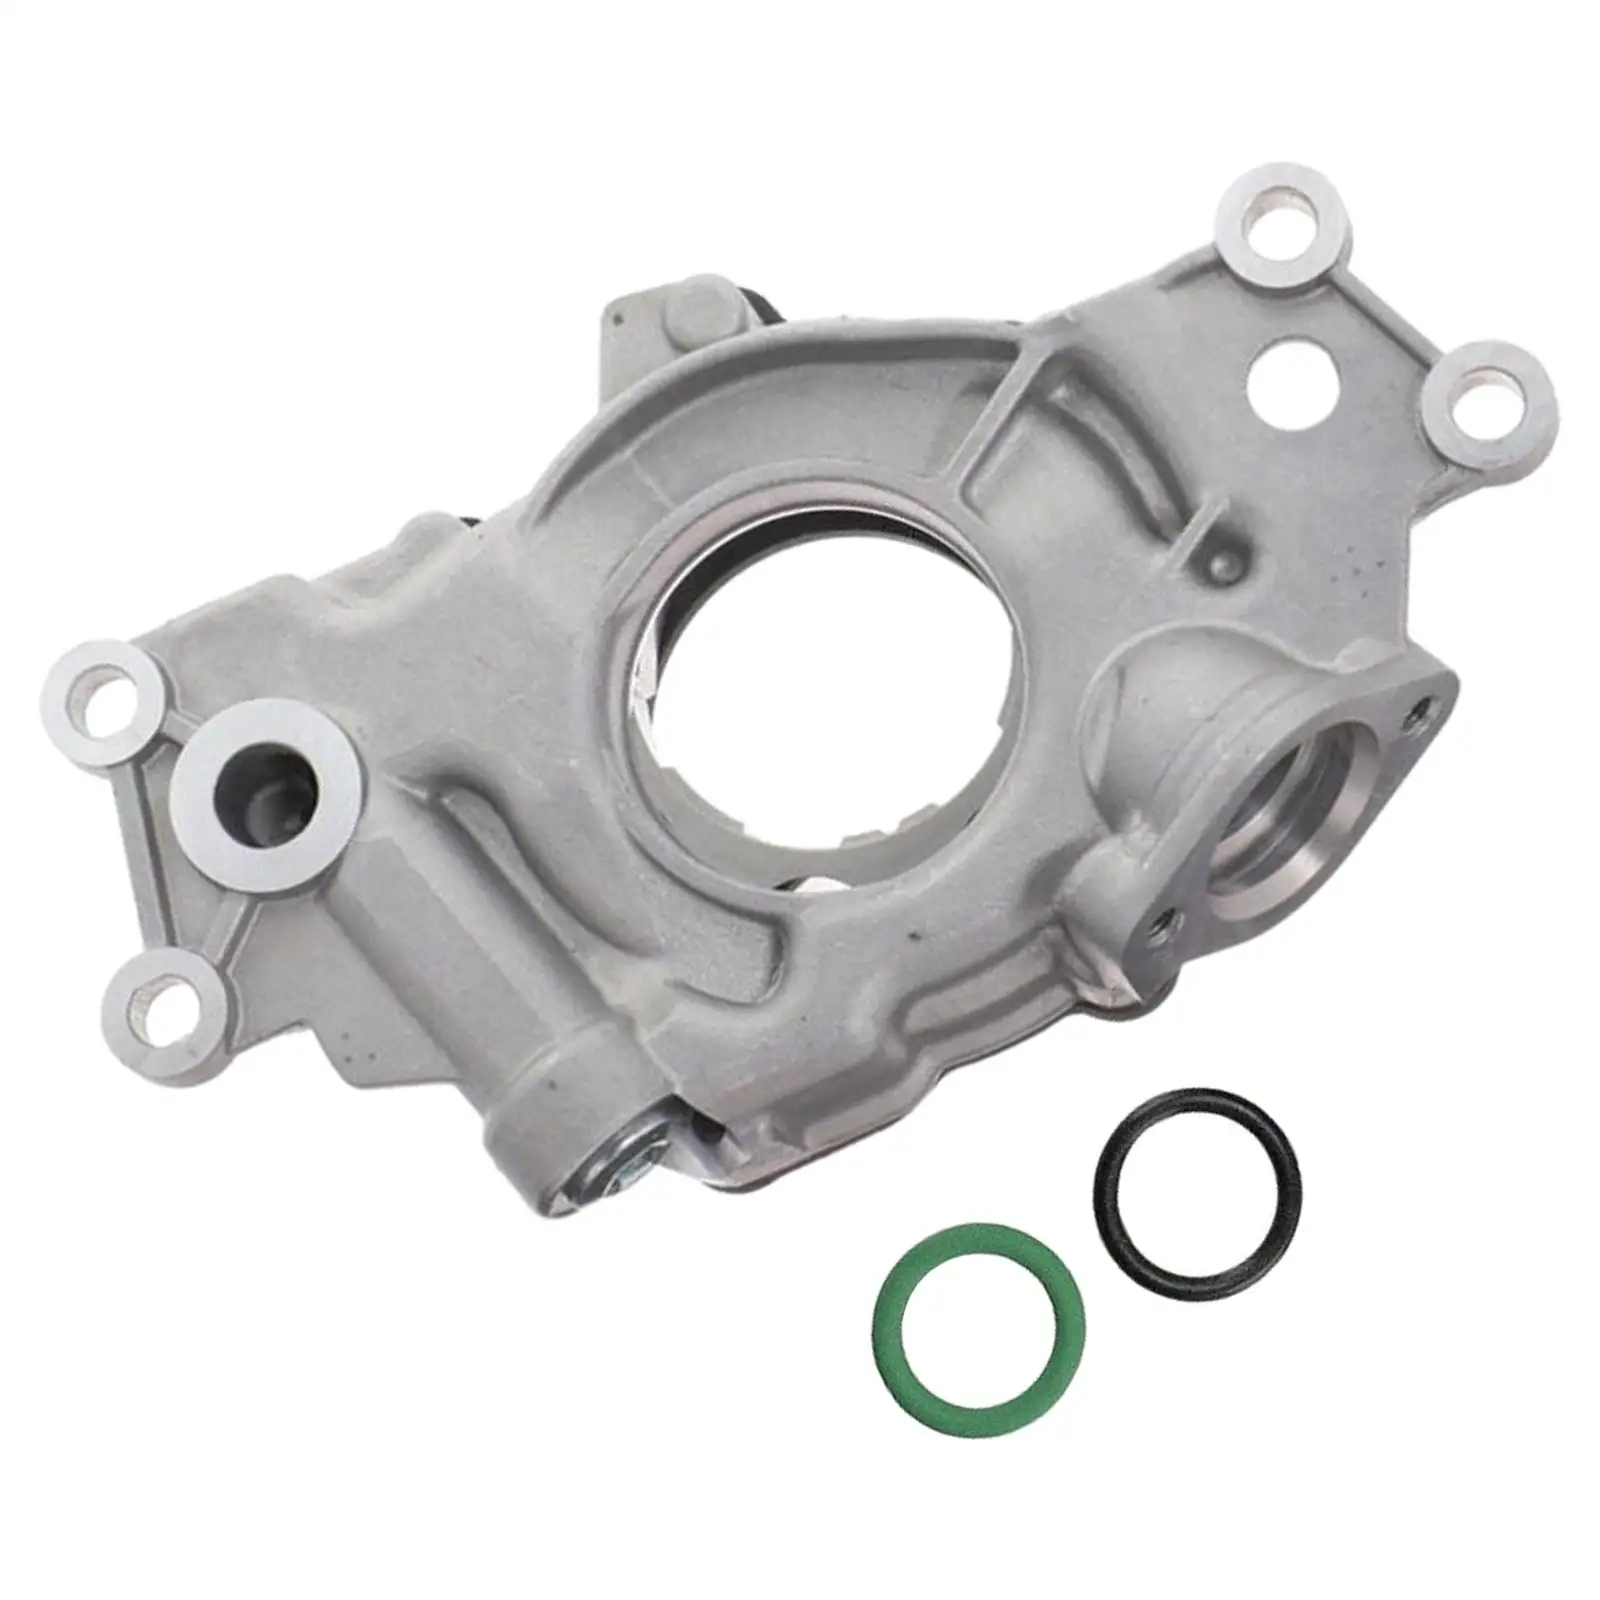 Engine Oil Pump Replacement M365hv for L92 Gen 4 Ls-based Engines LH6